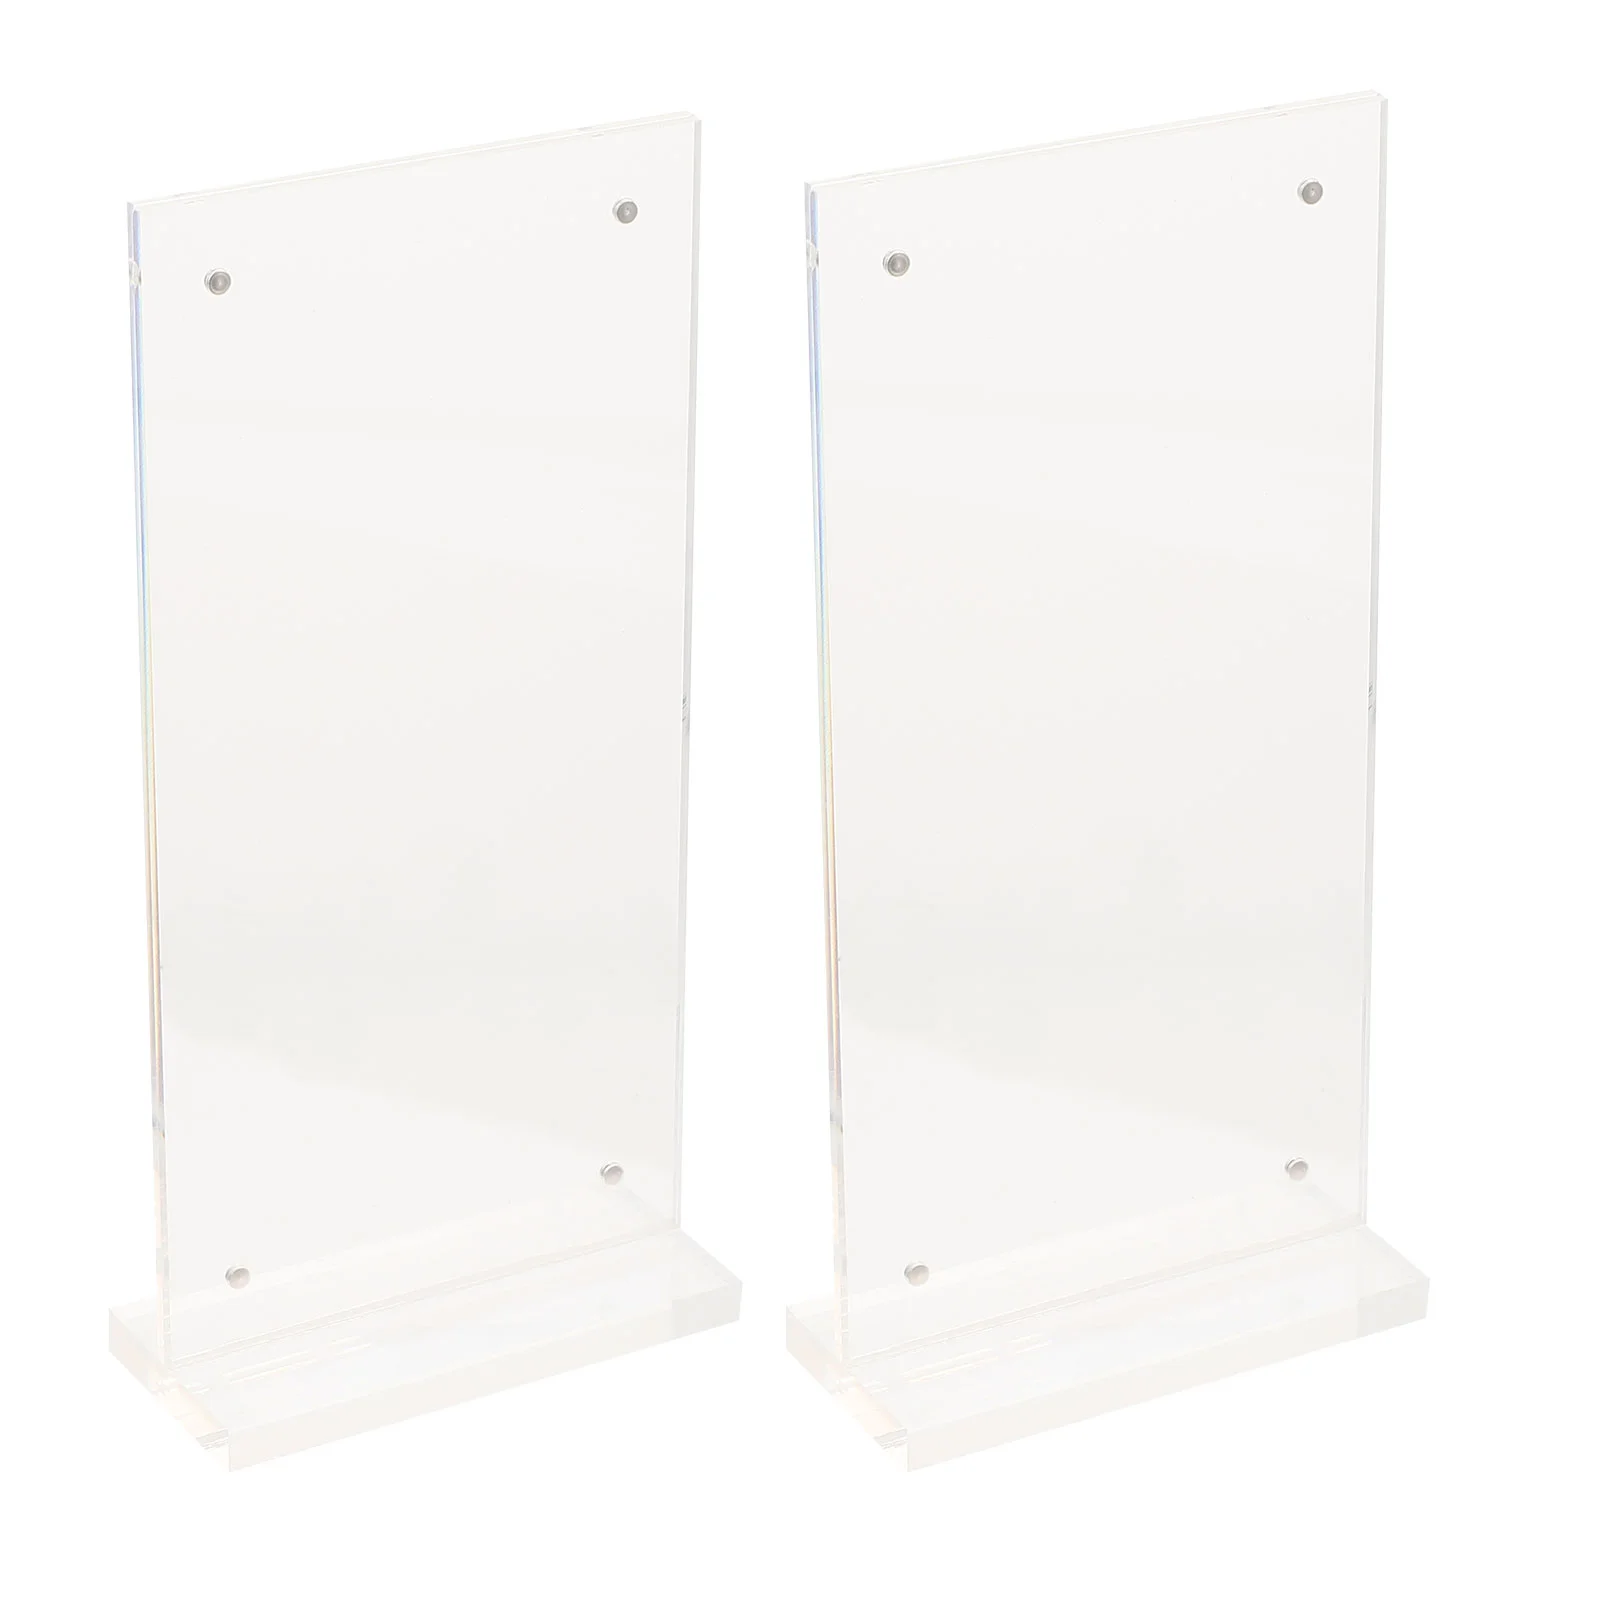 2Pcs Magnetic Acrylic Display Stand Table Menu Holder Clear Signs Centerpiece Decoration acrylic earring display rack geometric irregular clear transparent board ornaments decoration accessories jewelry storage stands